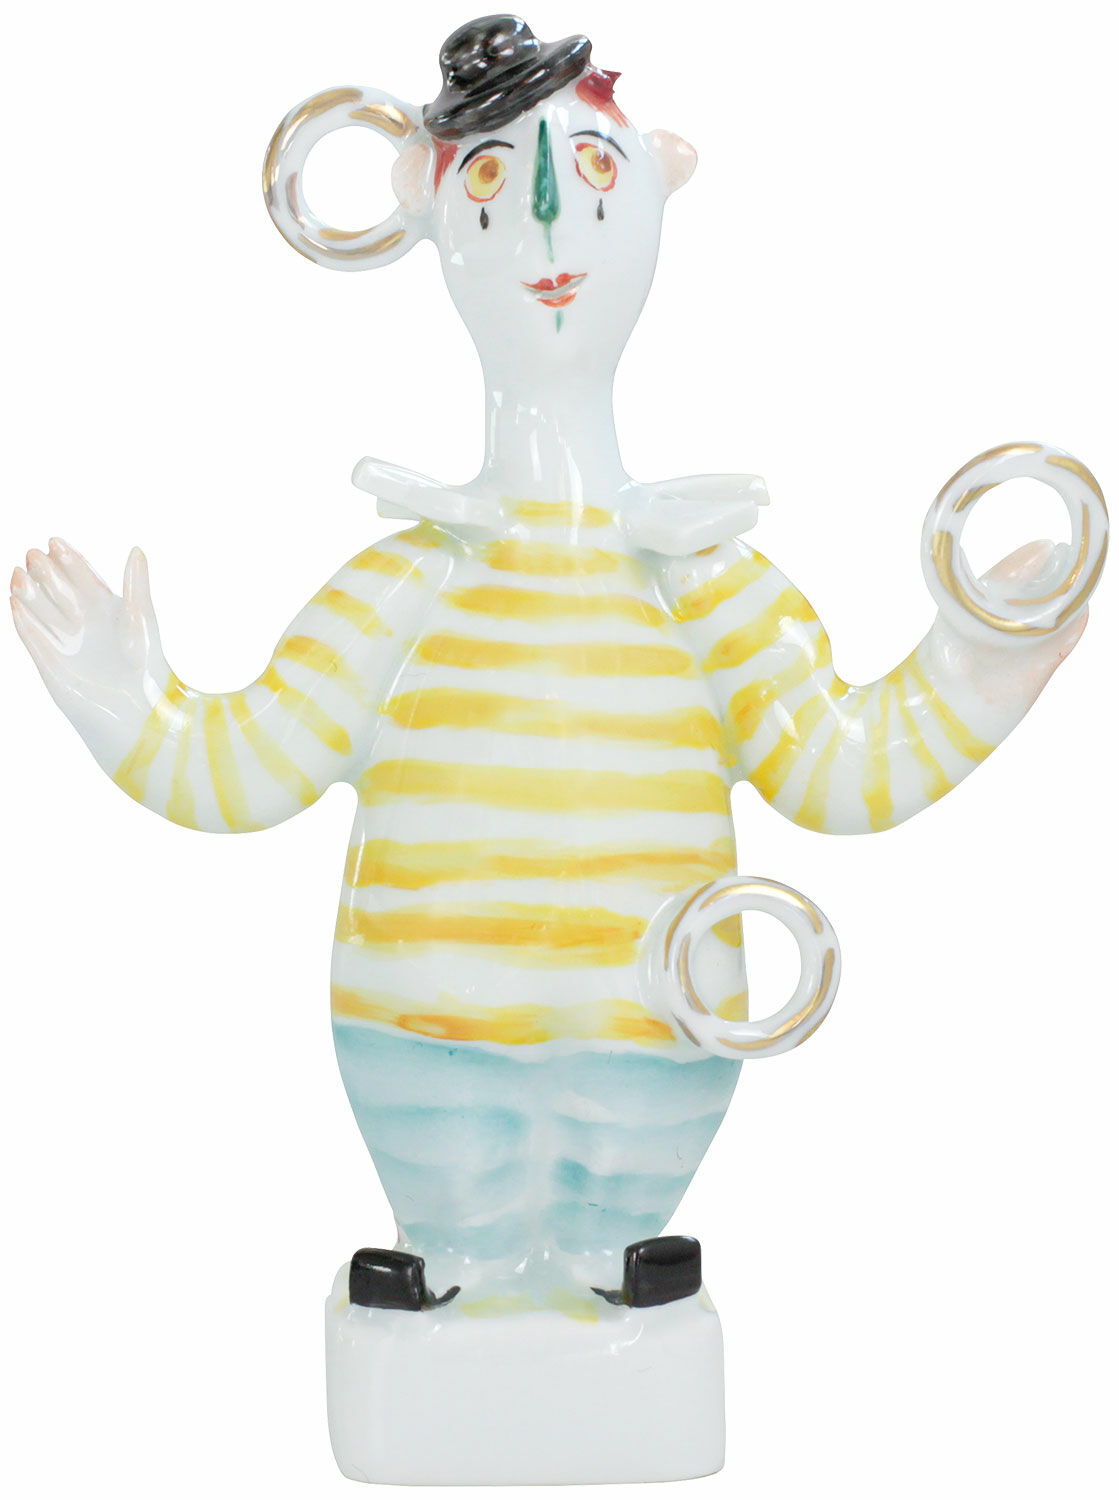 Sculpture "Clown with Rings", porcelain by Peter Strang